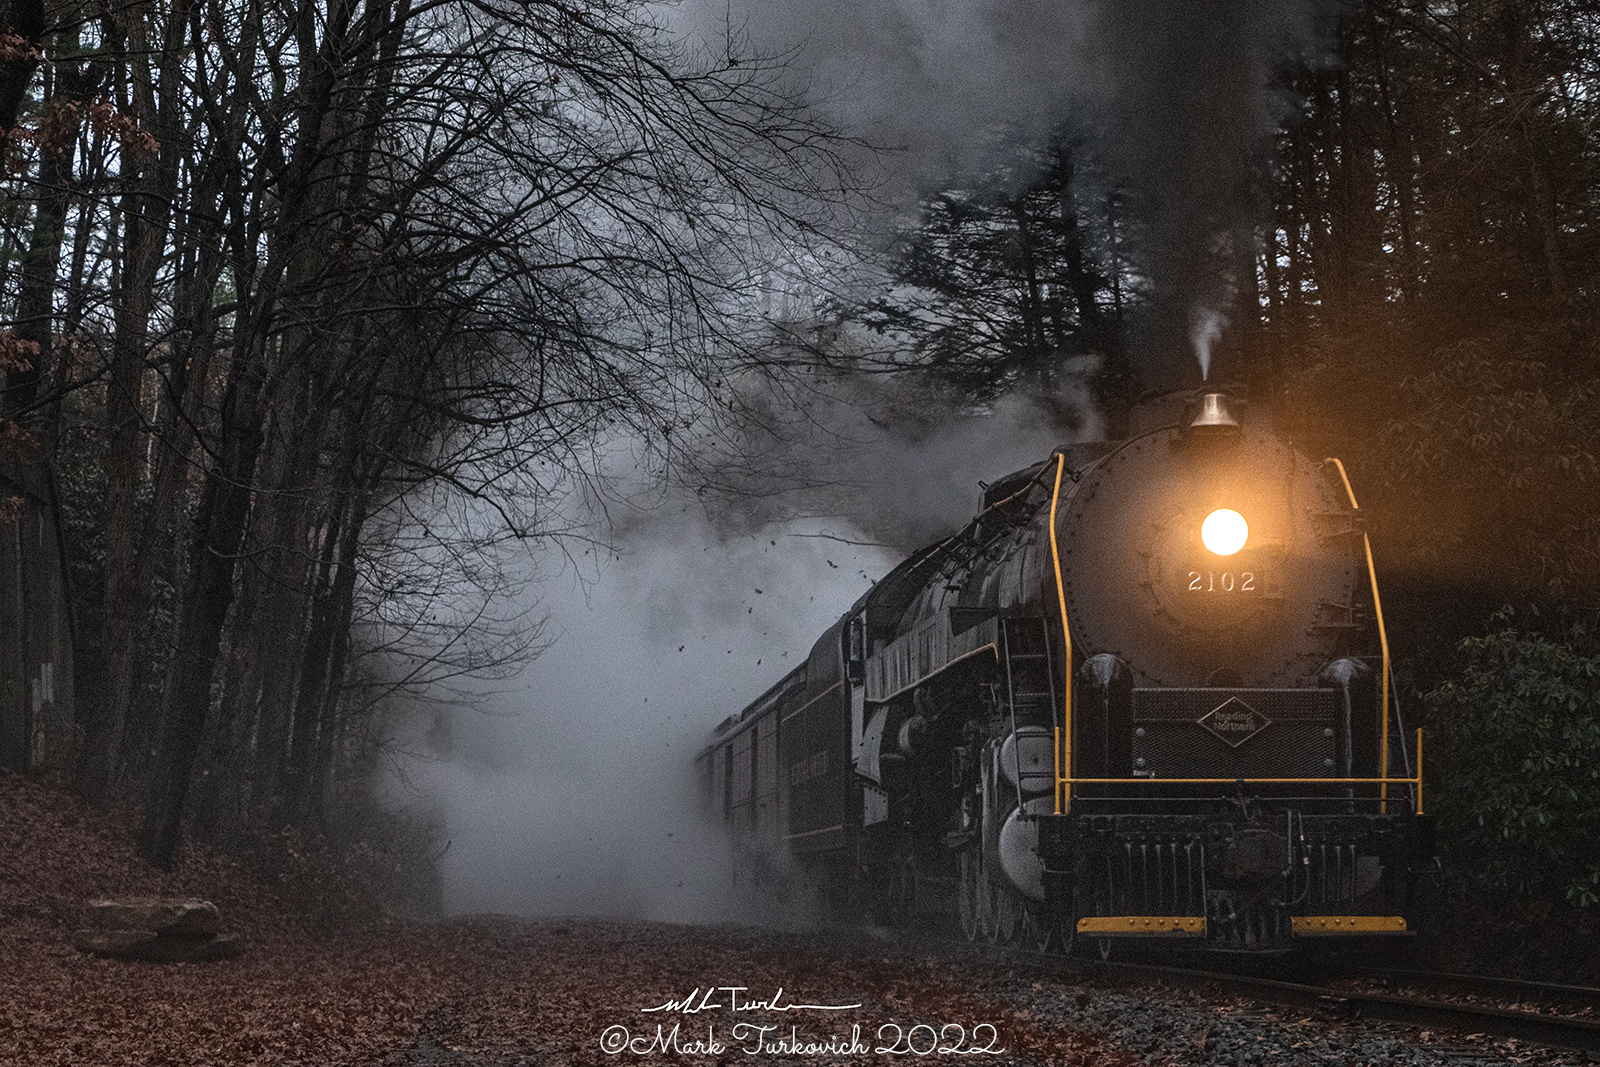 RDG 2102 is a class T-1 and  is pictured in Nesquehoning, Pennsylvania, USA.  This was taken along the Nesquehoning Tunnel on the Reading Company. Photo Copyright: Mark Turkovich uploaded to Railroad Gallery on 11/29/2022. This photograph of RDG 2102 was taken on Sunday, November 06, 2022. All Rights Reserved. 